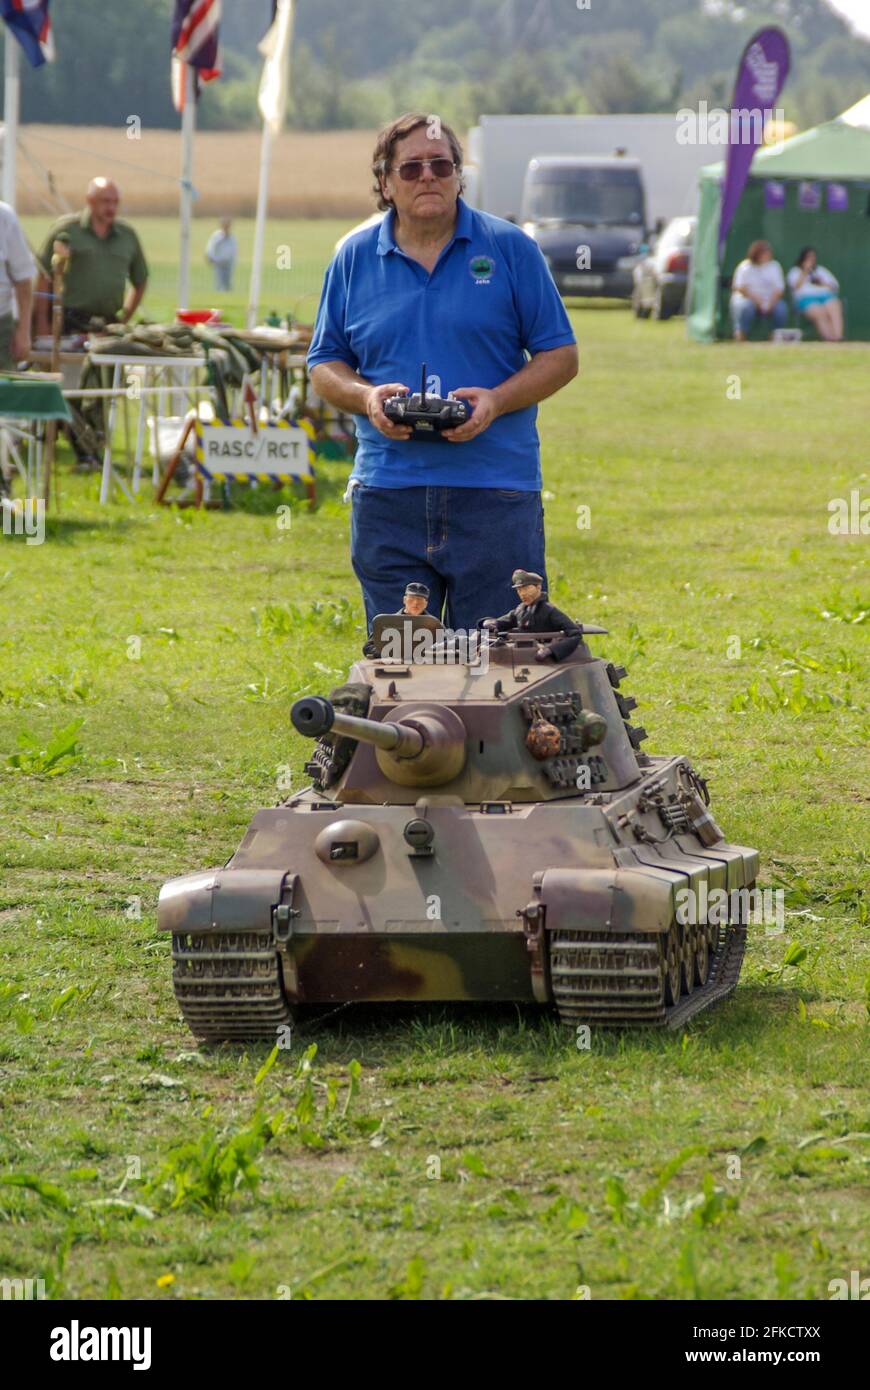 https://c8.alamy.com/comp/2FKCTXX/person-controlling-a-very-large-radio-controlled-german-panther-army-tank-of-the-second-world-war-at-an-outside-military-event-hobby-big-scale-2FKCTXX.jpg